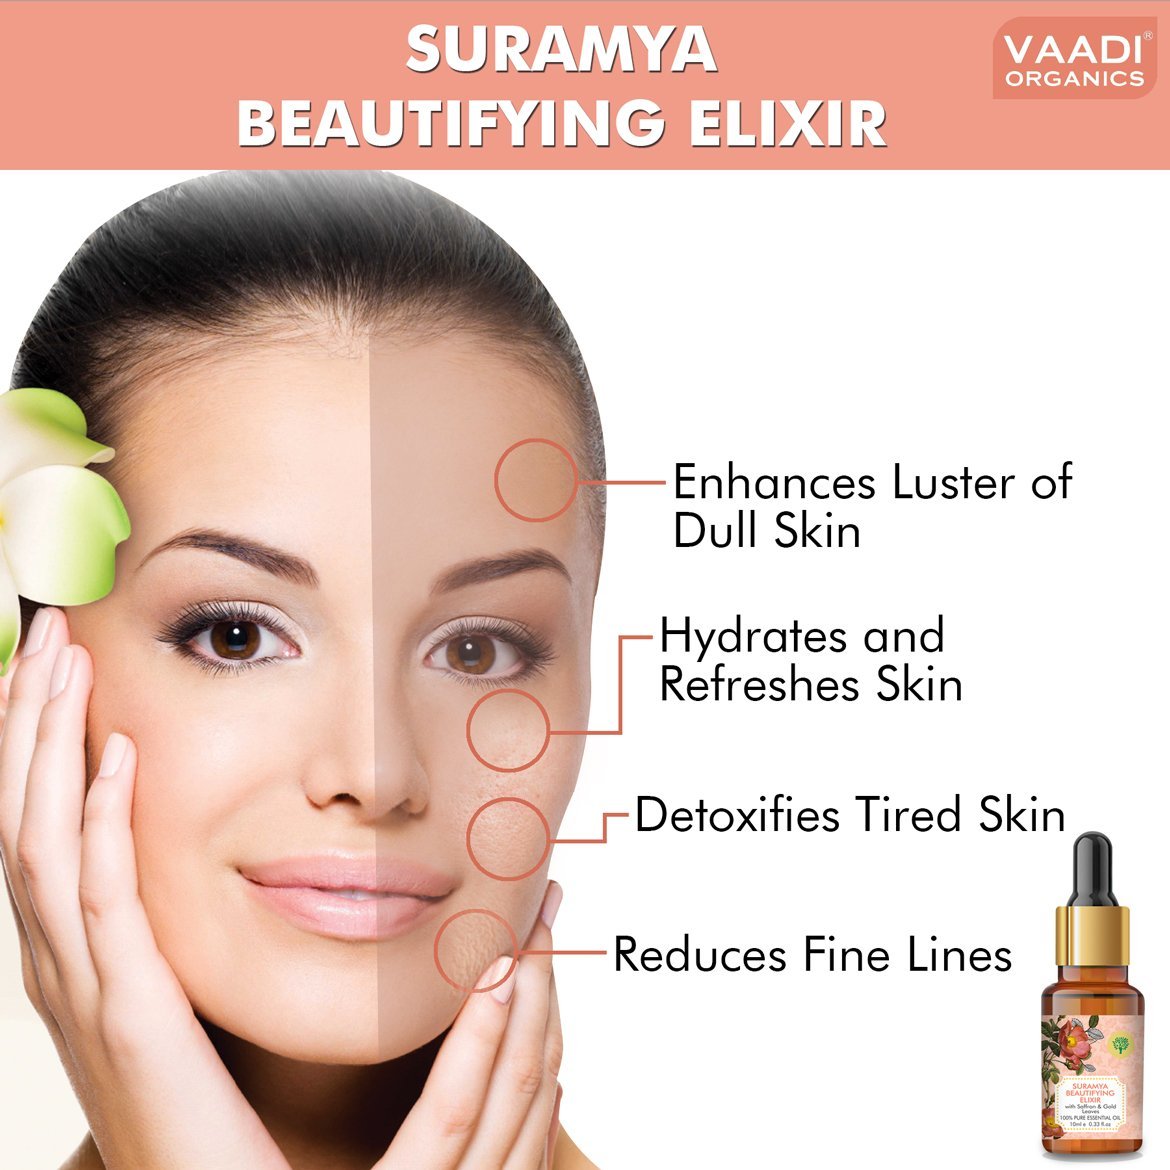 Organic Suramya Beautifying Elixr (Pure Mix of Saffron, 24k Gold Leaves & Sweet Almond Oil) - Reduces Fine Lines, Improves Skin Complexion & Gives a Natural Glow (10 ml/ 0.33 oz)